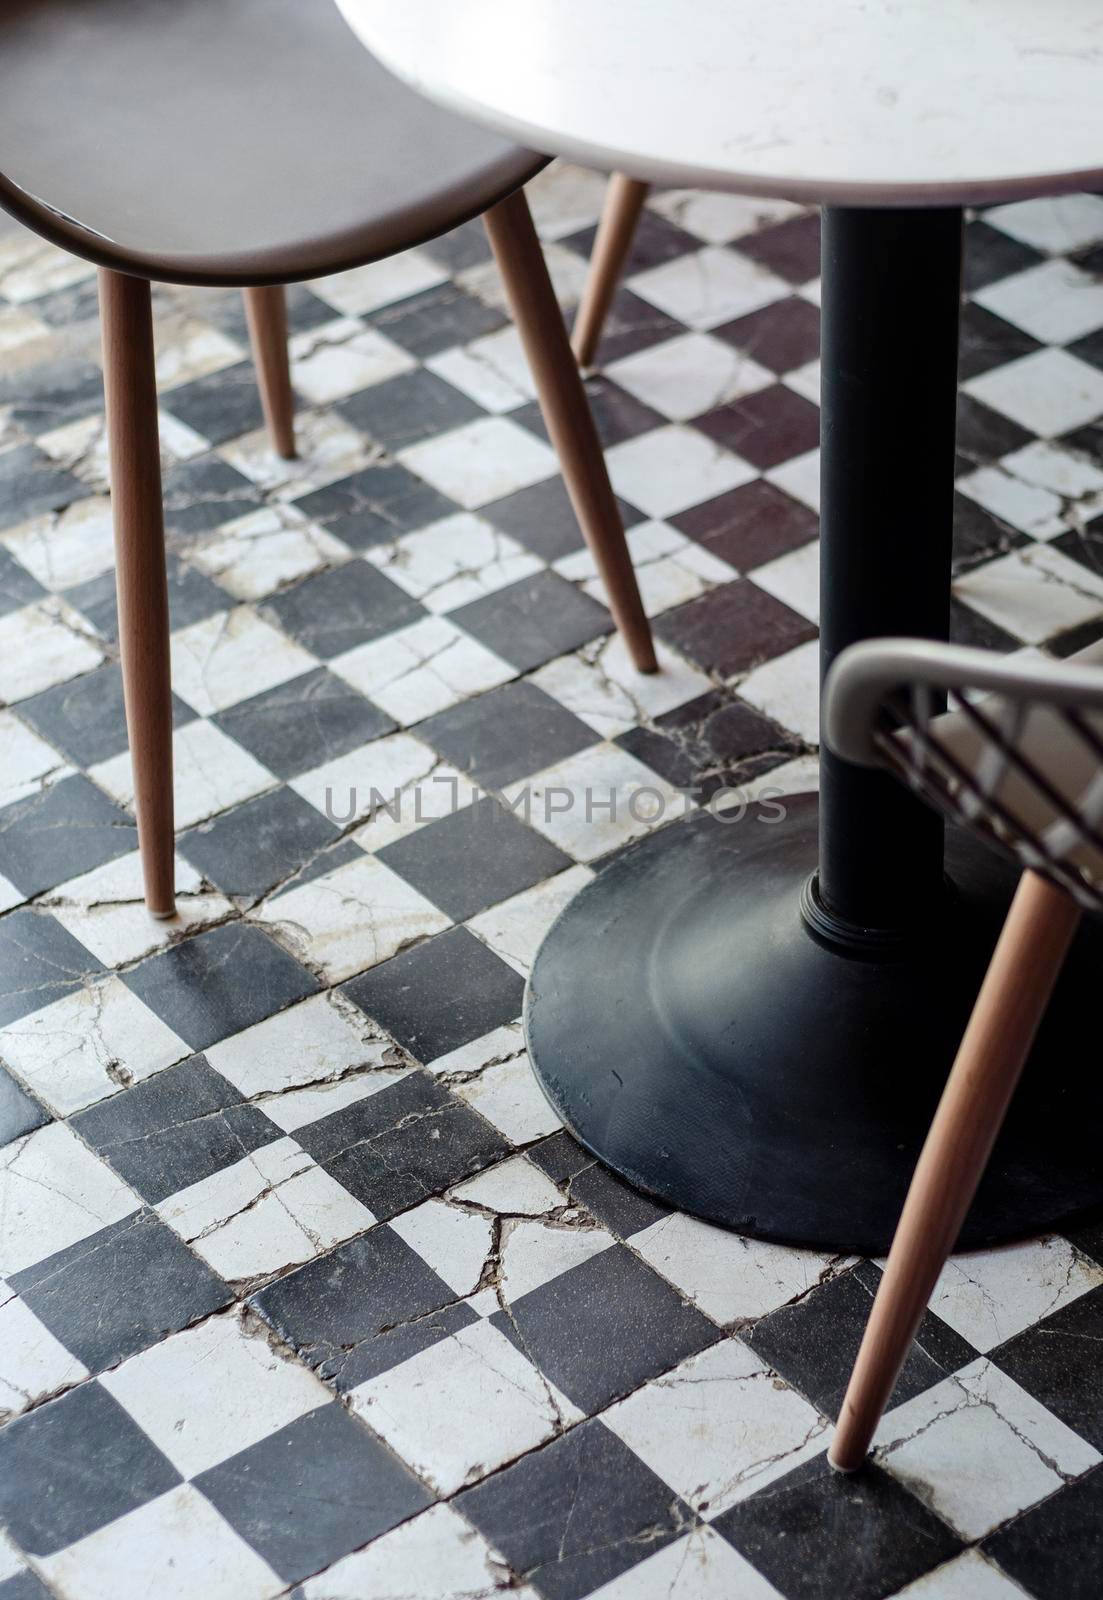 traditional design old rustic floor tiles detail in trendy Ibiza cafe